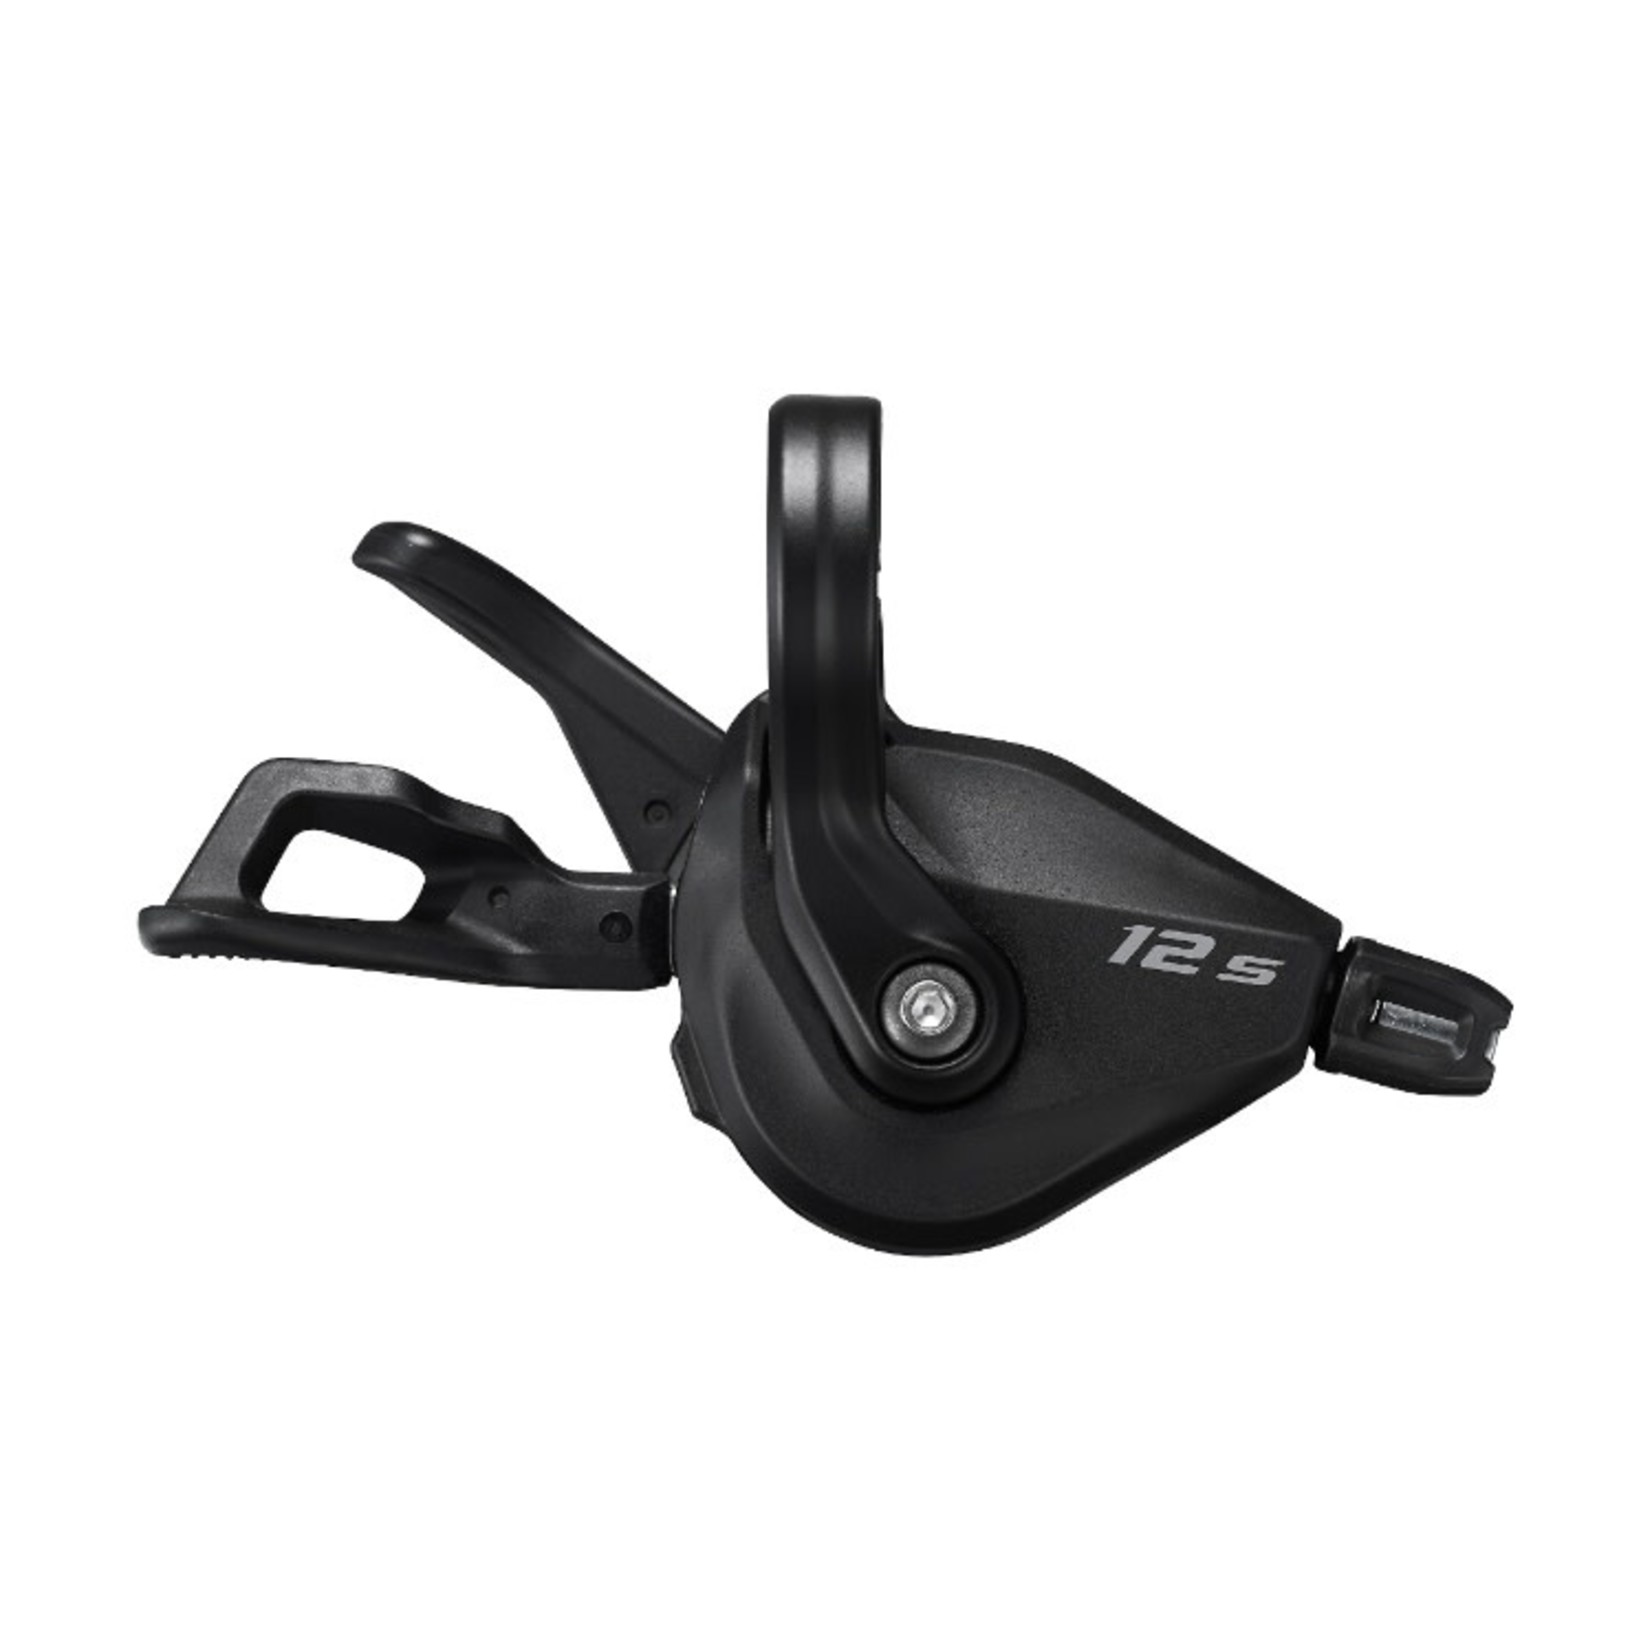 Shimano Shimano Deore 1x12 SHIFT LEVER, SL-M6100-R, DEORE, RIGHT, 12-SPEED RAPIDFIRE PLUS 2050MM INNER, W/O OGD, BLACK OT-SP41S (1880MM), 6MM CAP X 3, NOSE CAP X 1